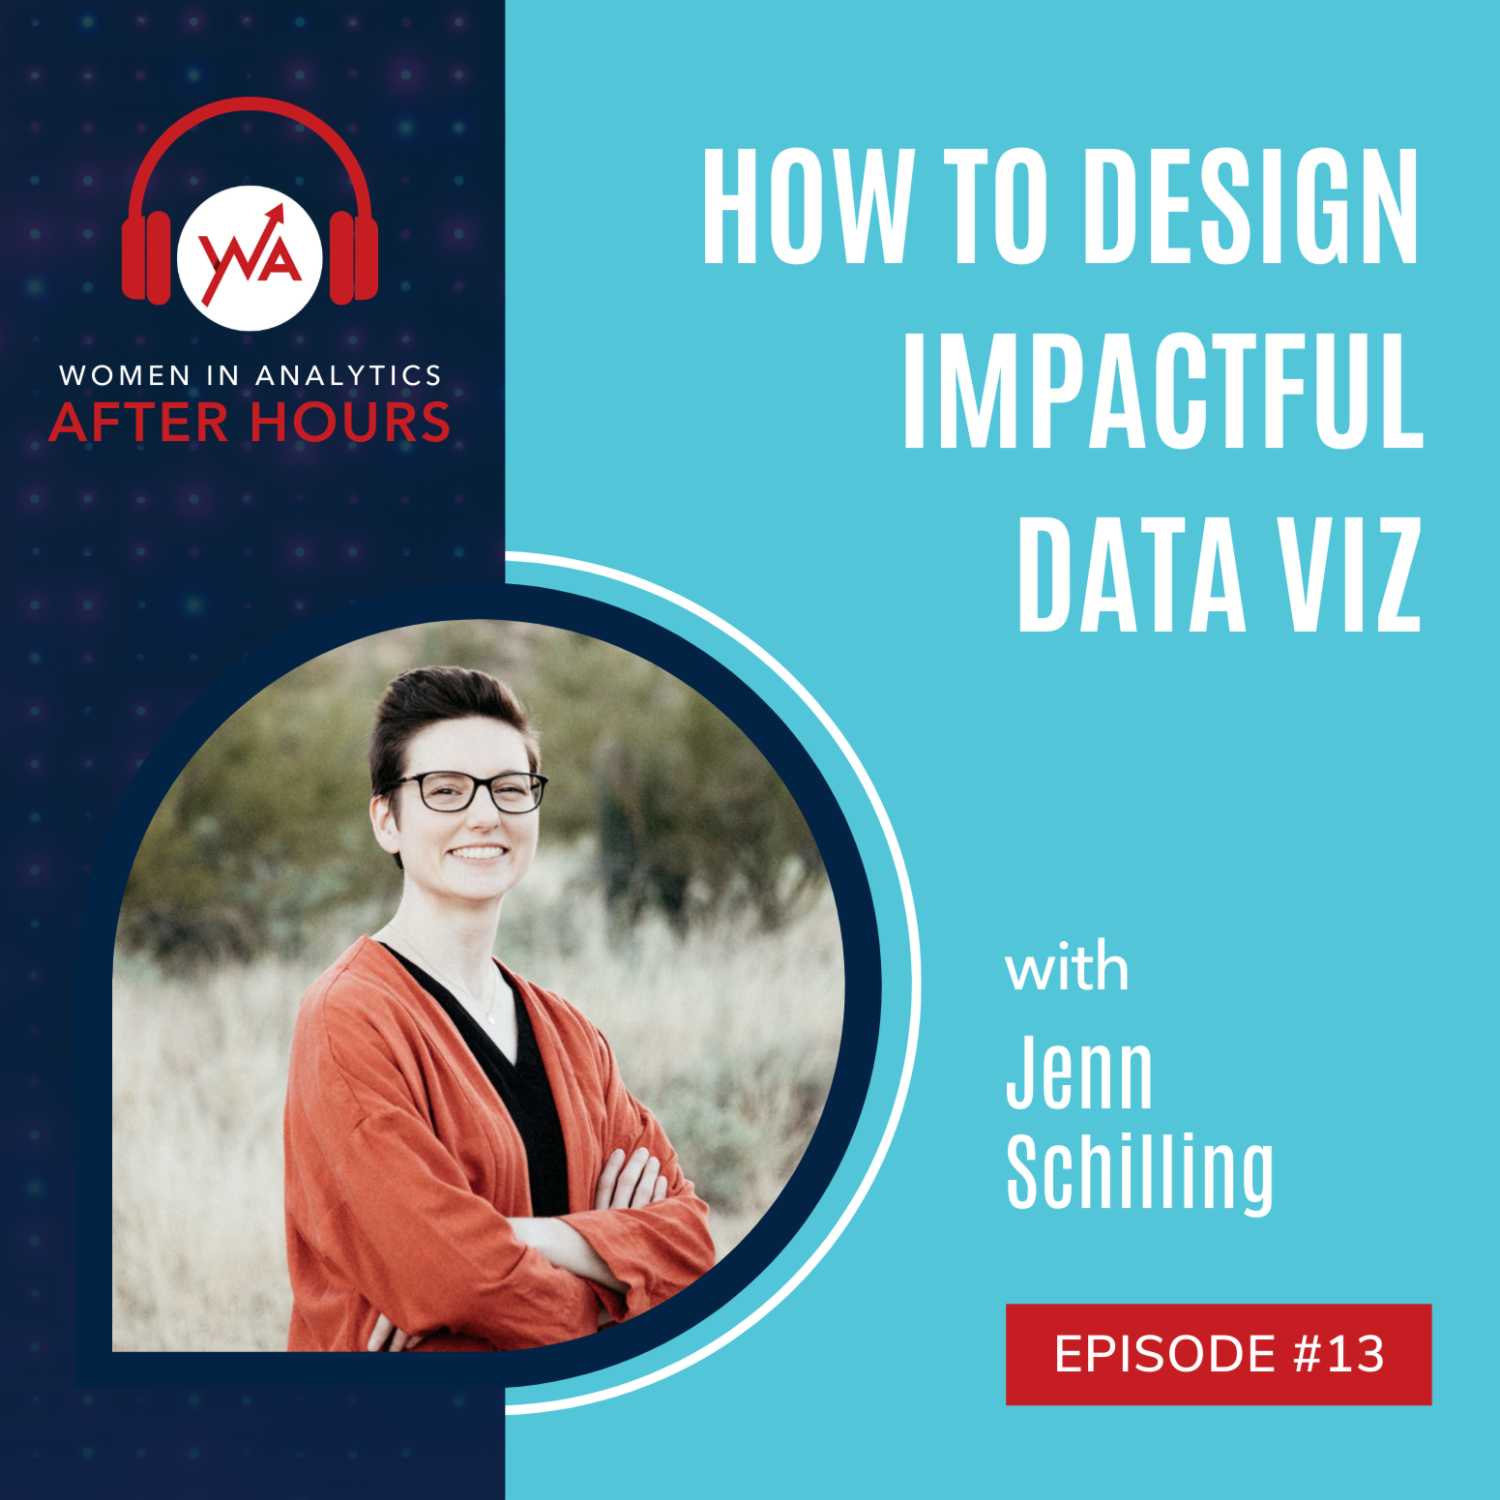 Episode 13: How to Design Impactful Data Visualizations with Jenn Schilling